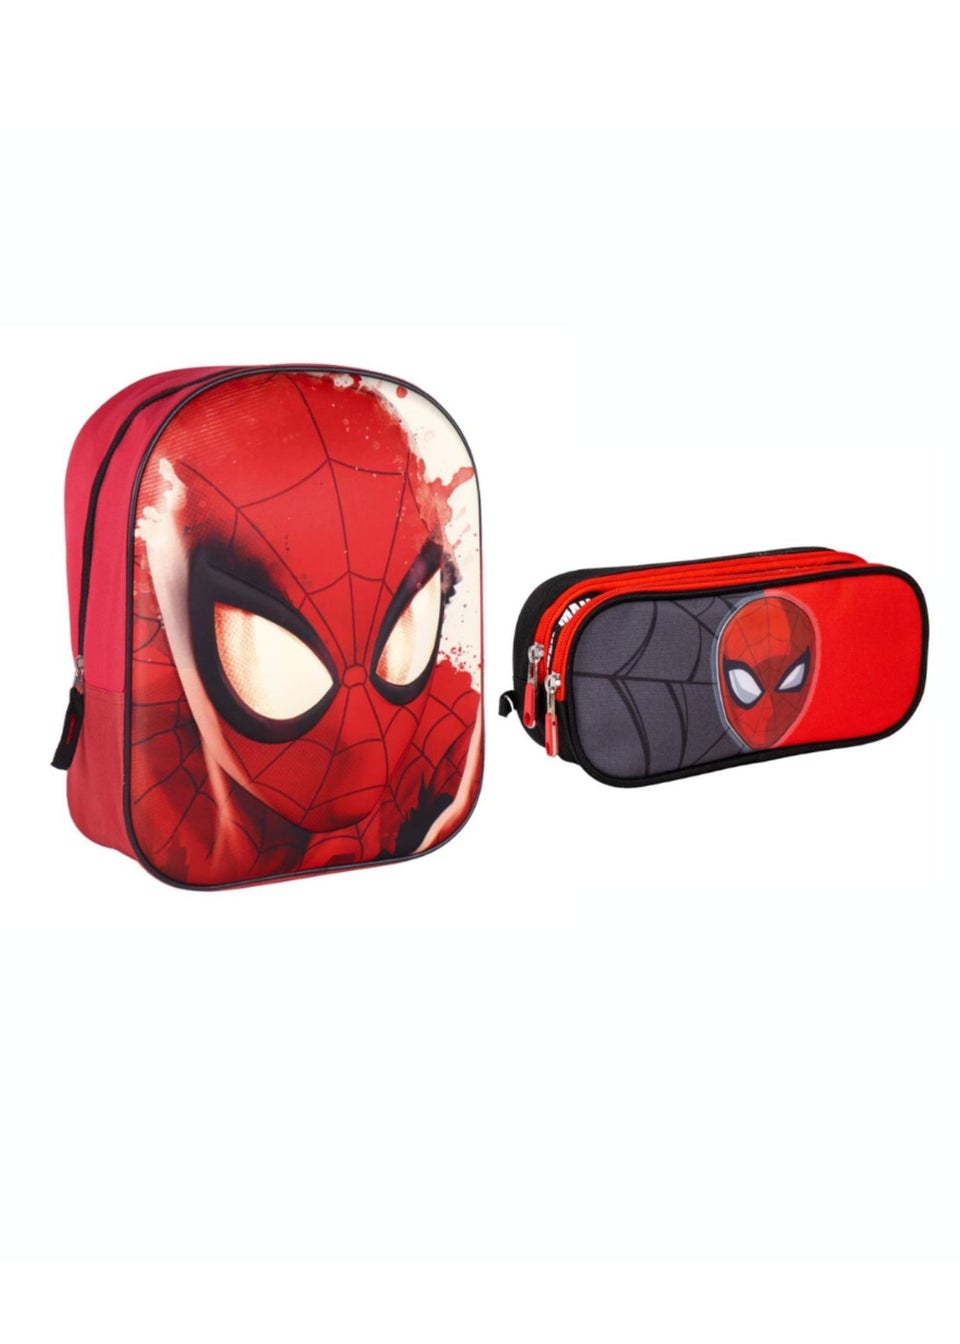 Spiderman Red Spiderman Backpack And Pencil Case